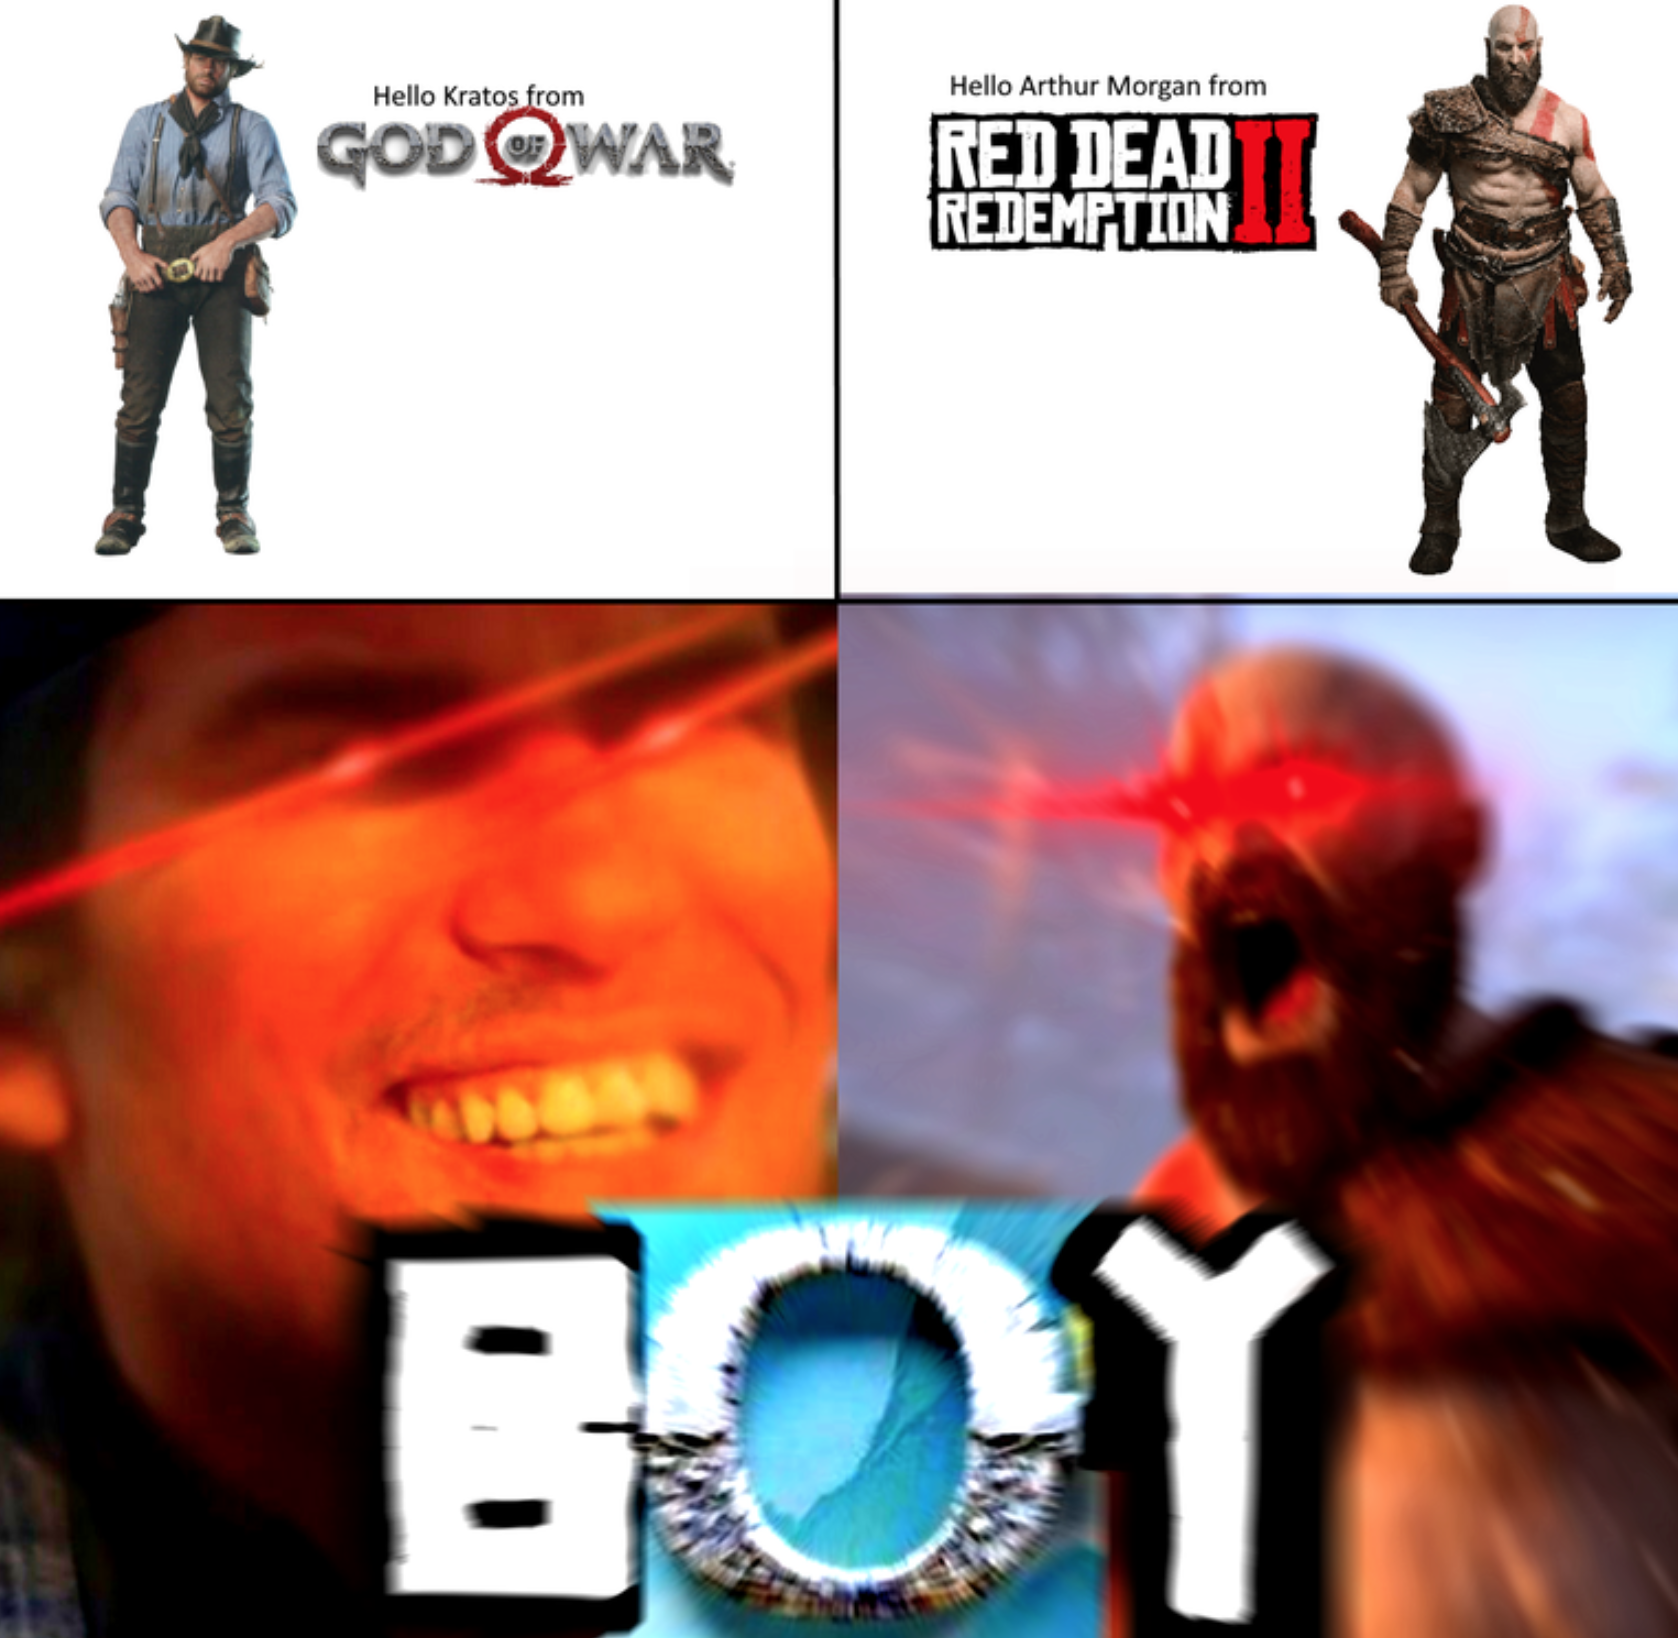 funny gaming memes - album cover - Hello Kratos from God Qwar Hello Arthur Morgan from Red Dead Redemption Boy